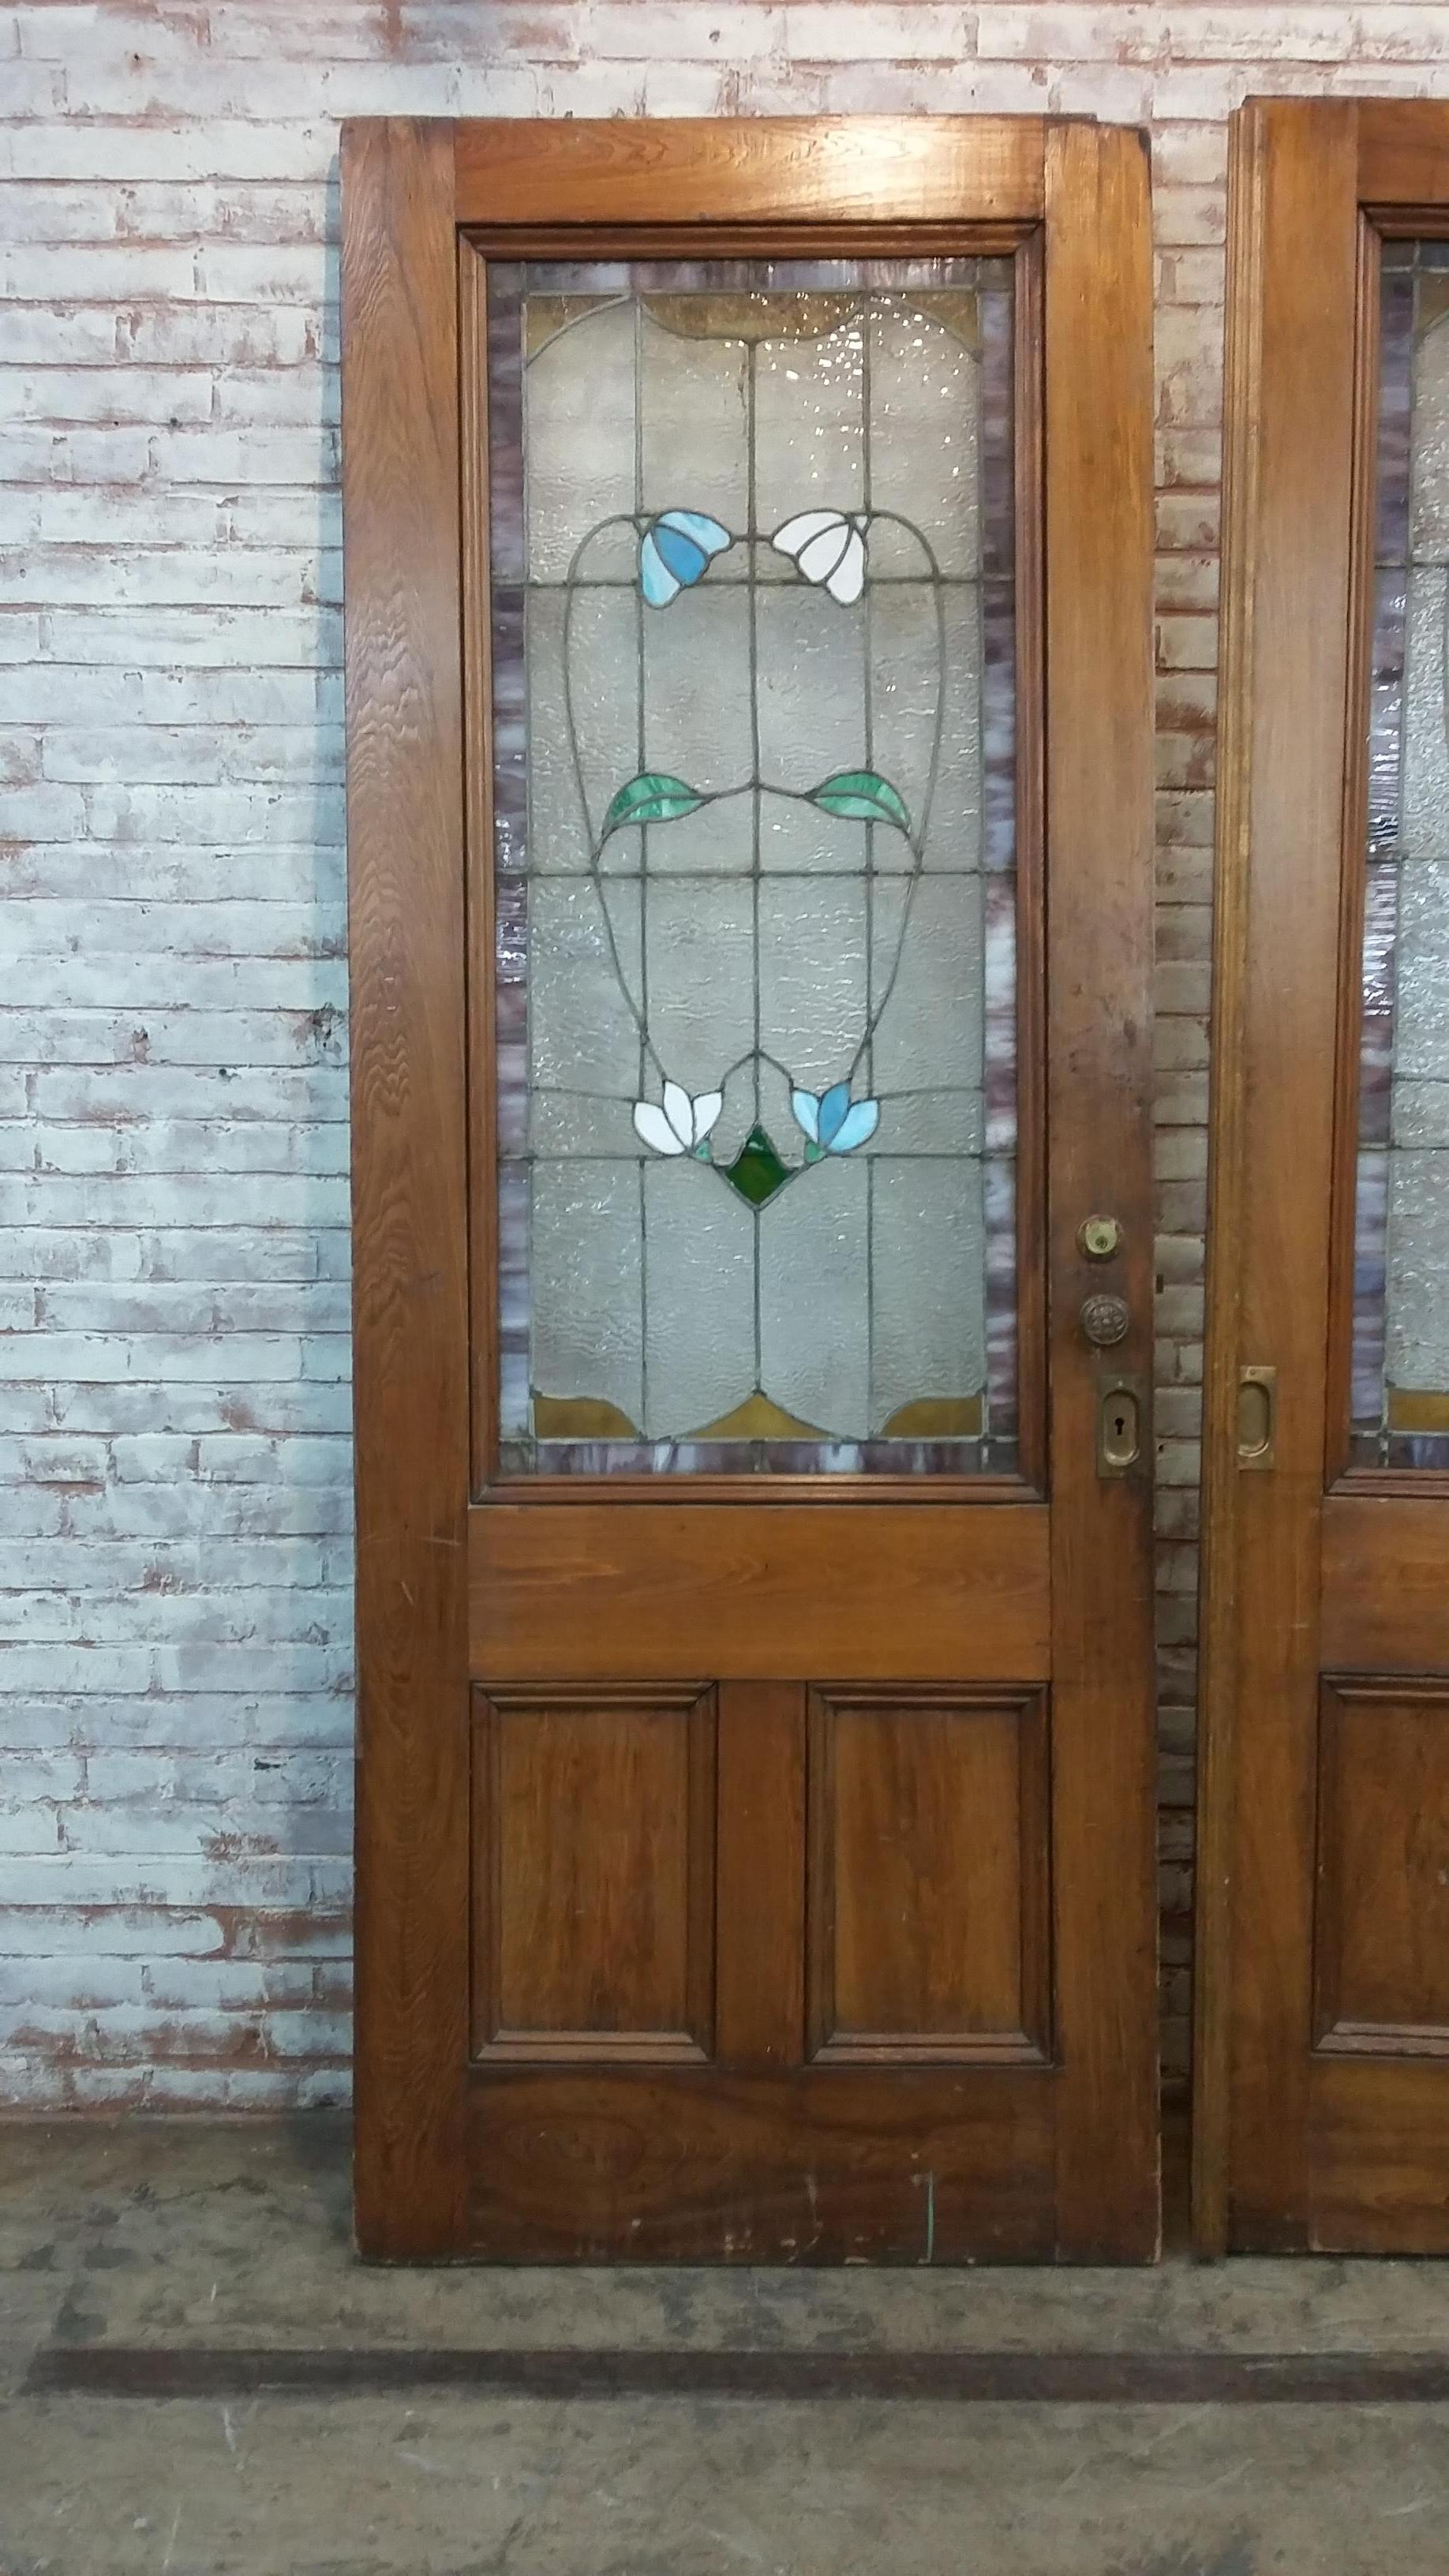 Victorian pocket doors with stained glass panels
Original bronze knobs
Very good condition with only one crack visible on right door
Doors may have been converted from pocket doors
Each door is 96